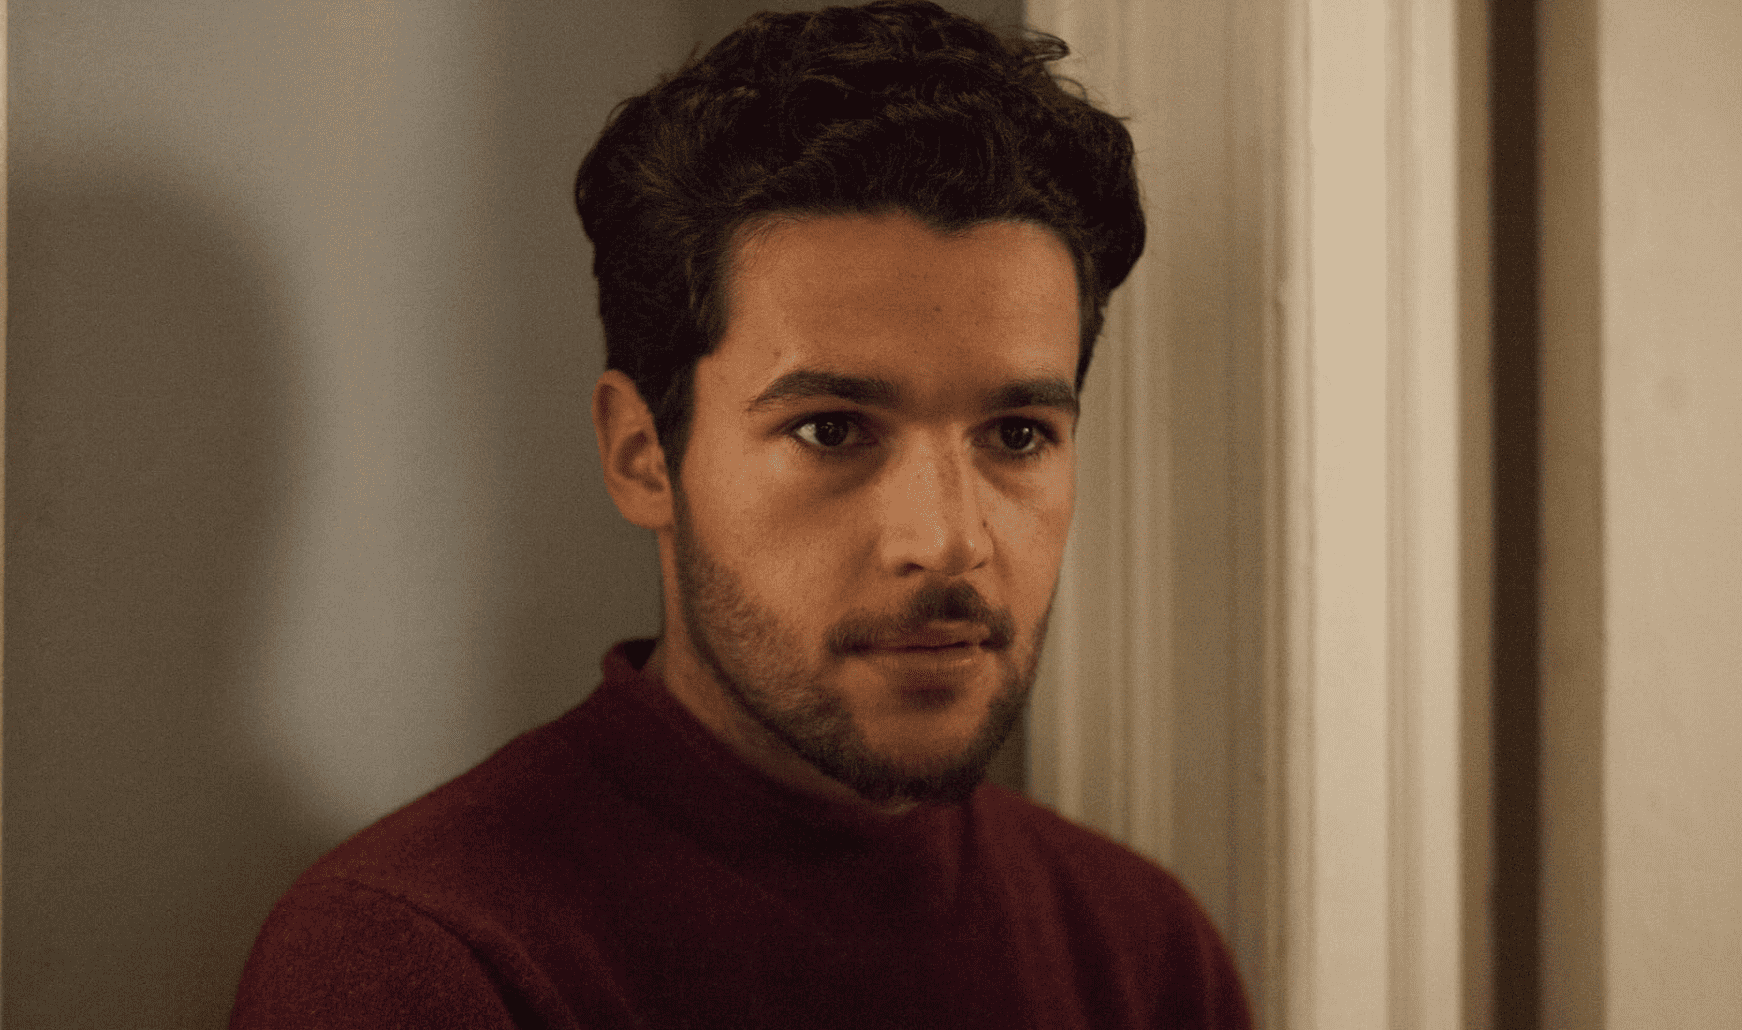 Charlie, played by Christopher Abbott, staring off-camera wearing a red turtleneck sweater in this image from Apatow Productions